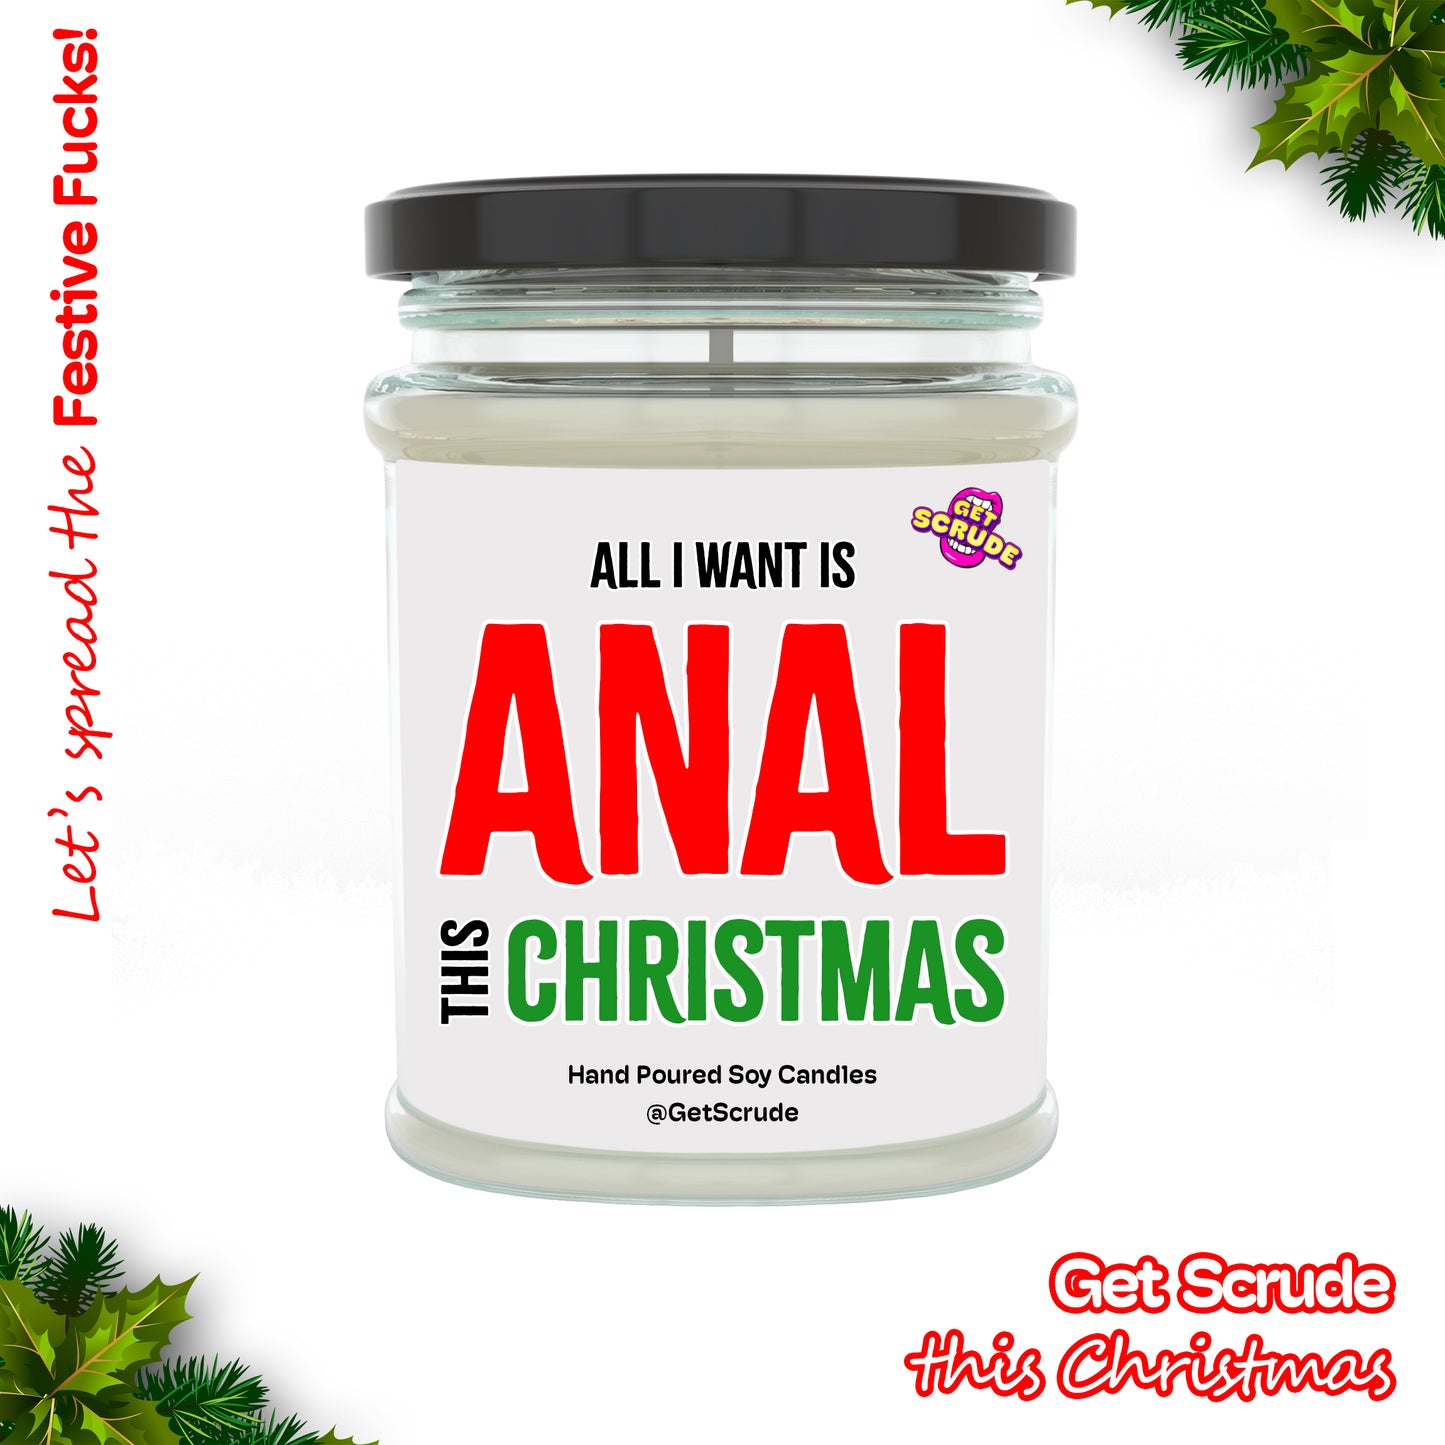 All I want for Christmas (ANAL)